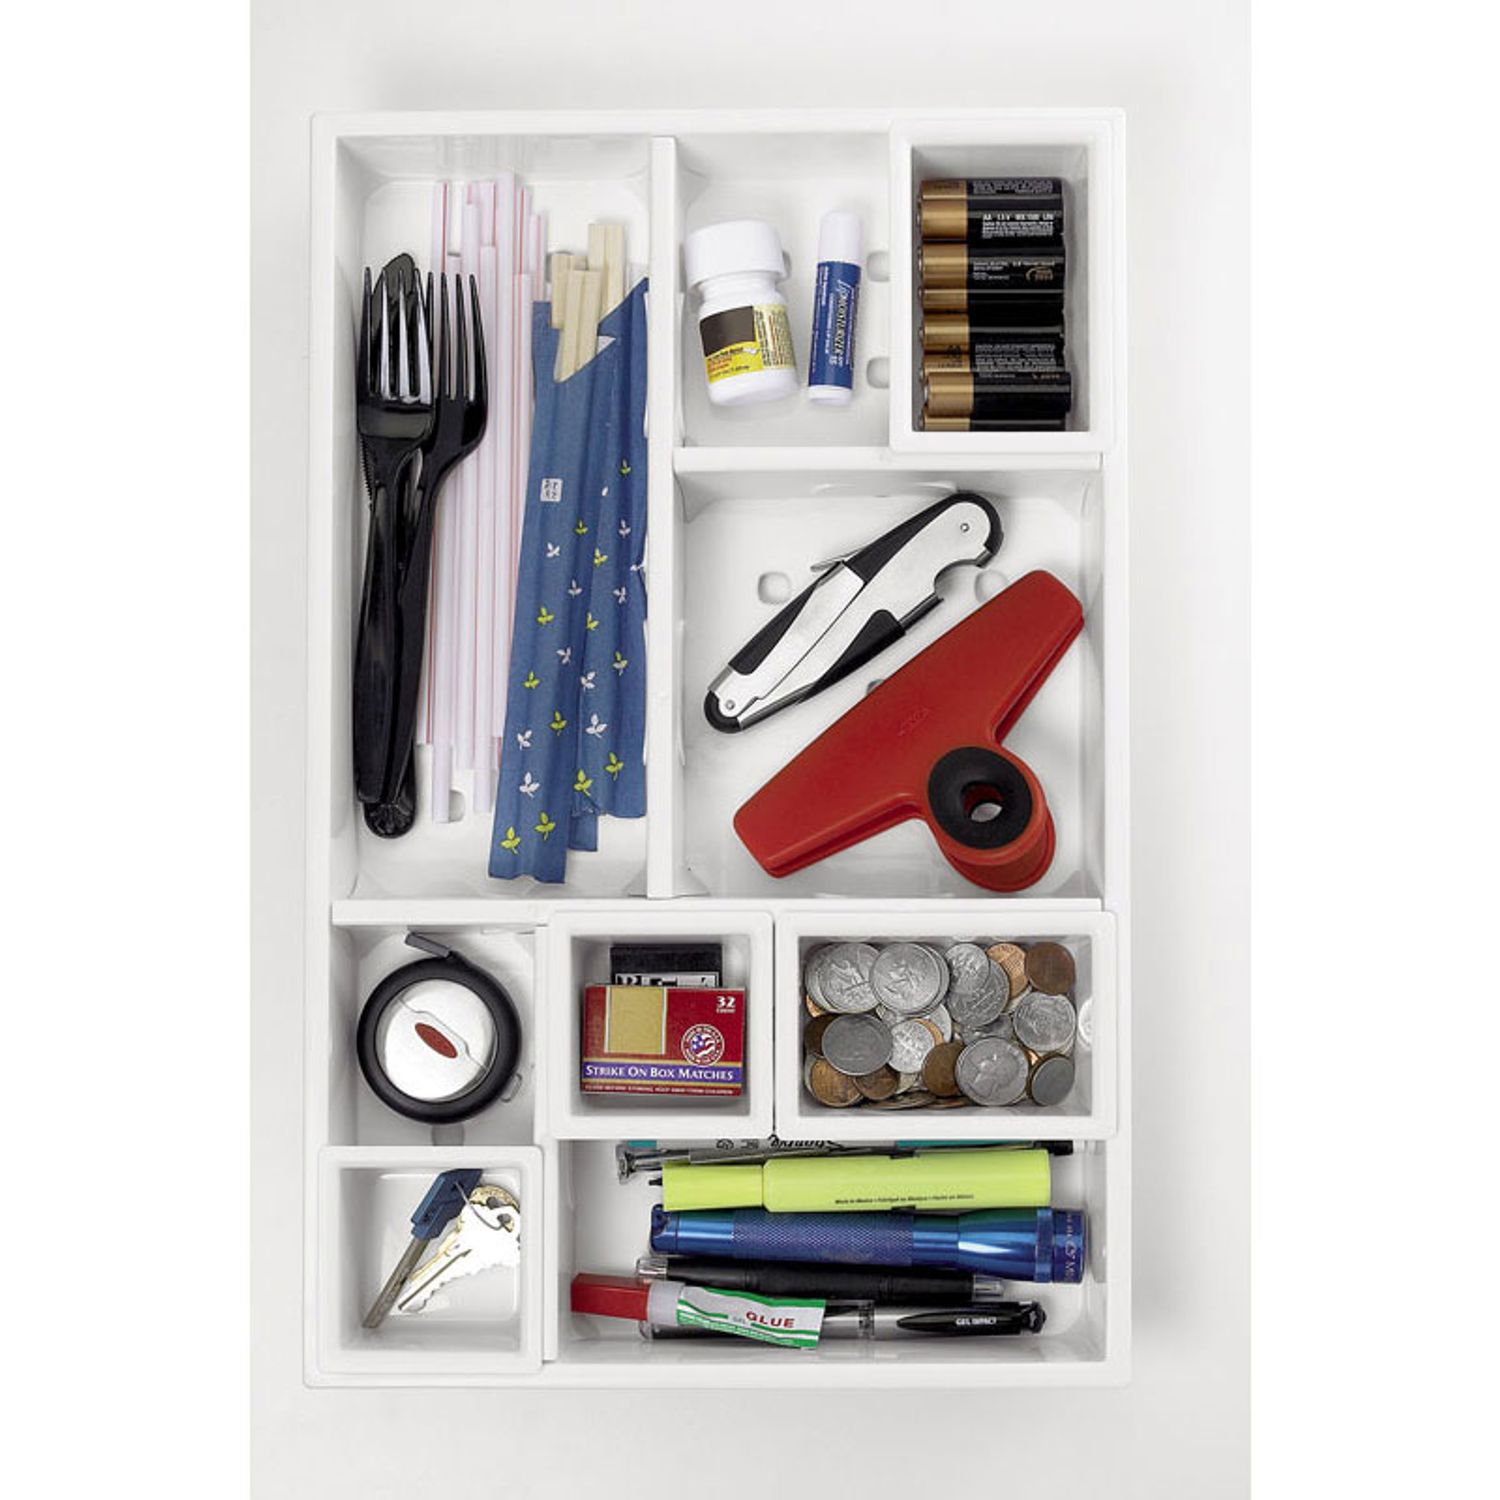 OXO Good Grips Hold Anything Drawer Organizer - KnifeCenter - OXO1335700 -  Discontinued